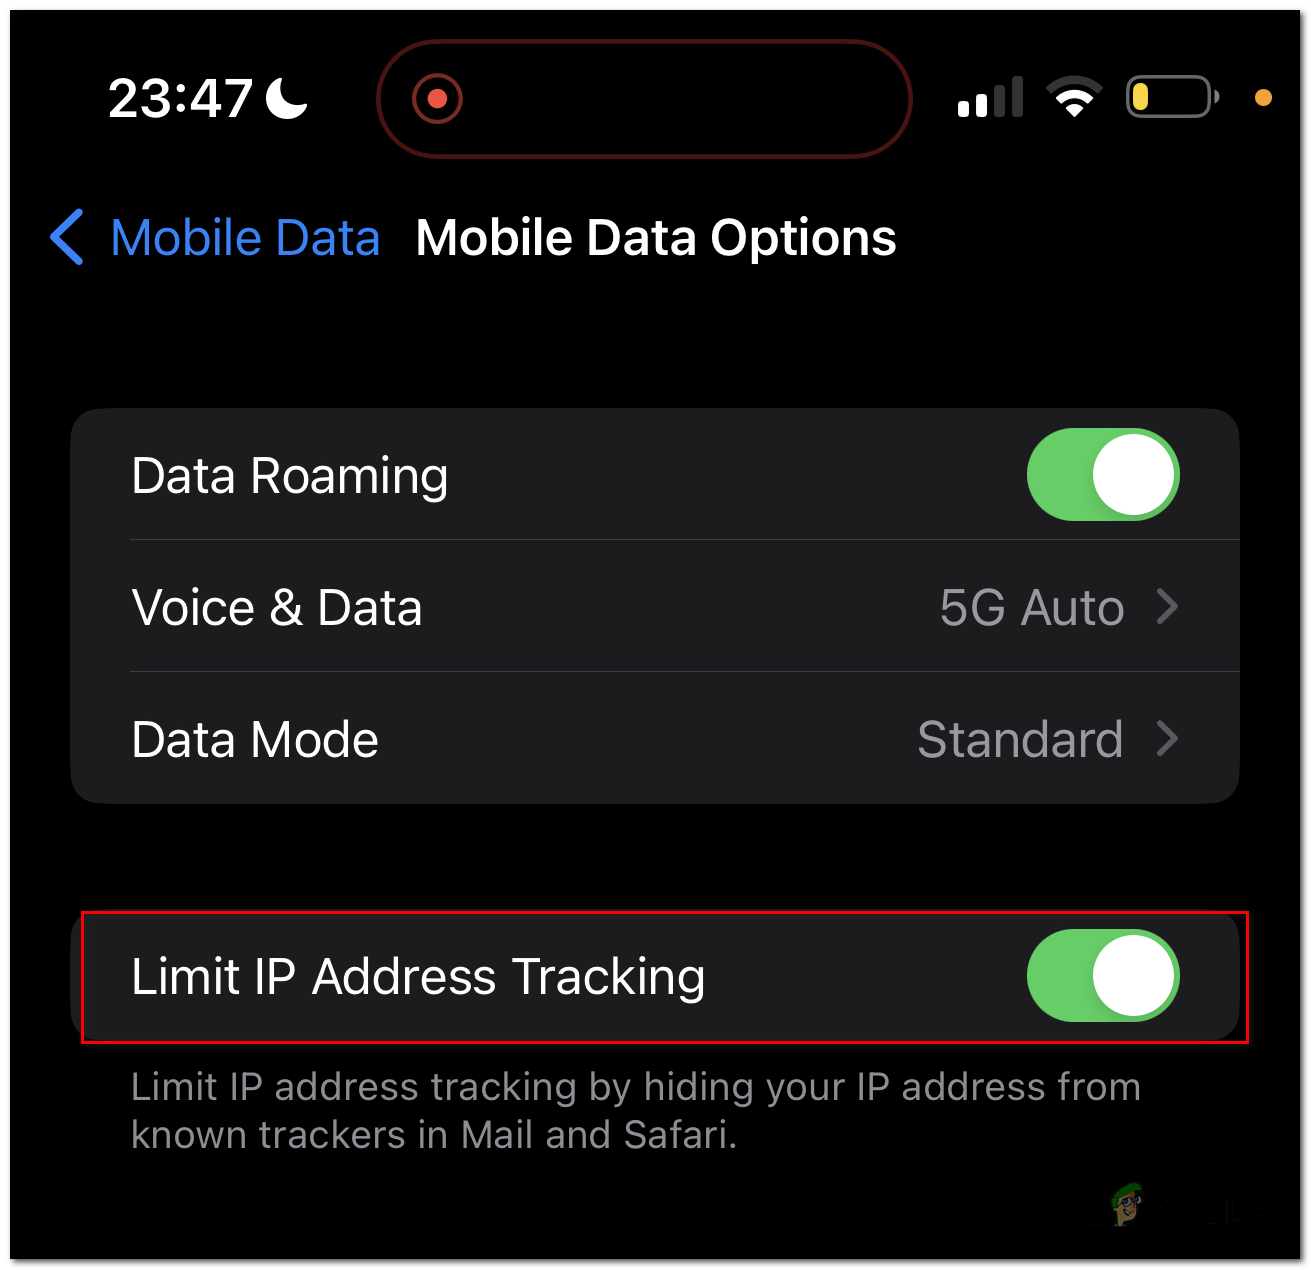 Disable the "Limit IP Address Tracking" option.